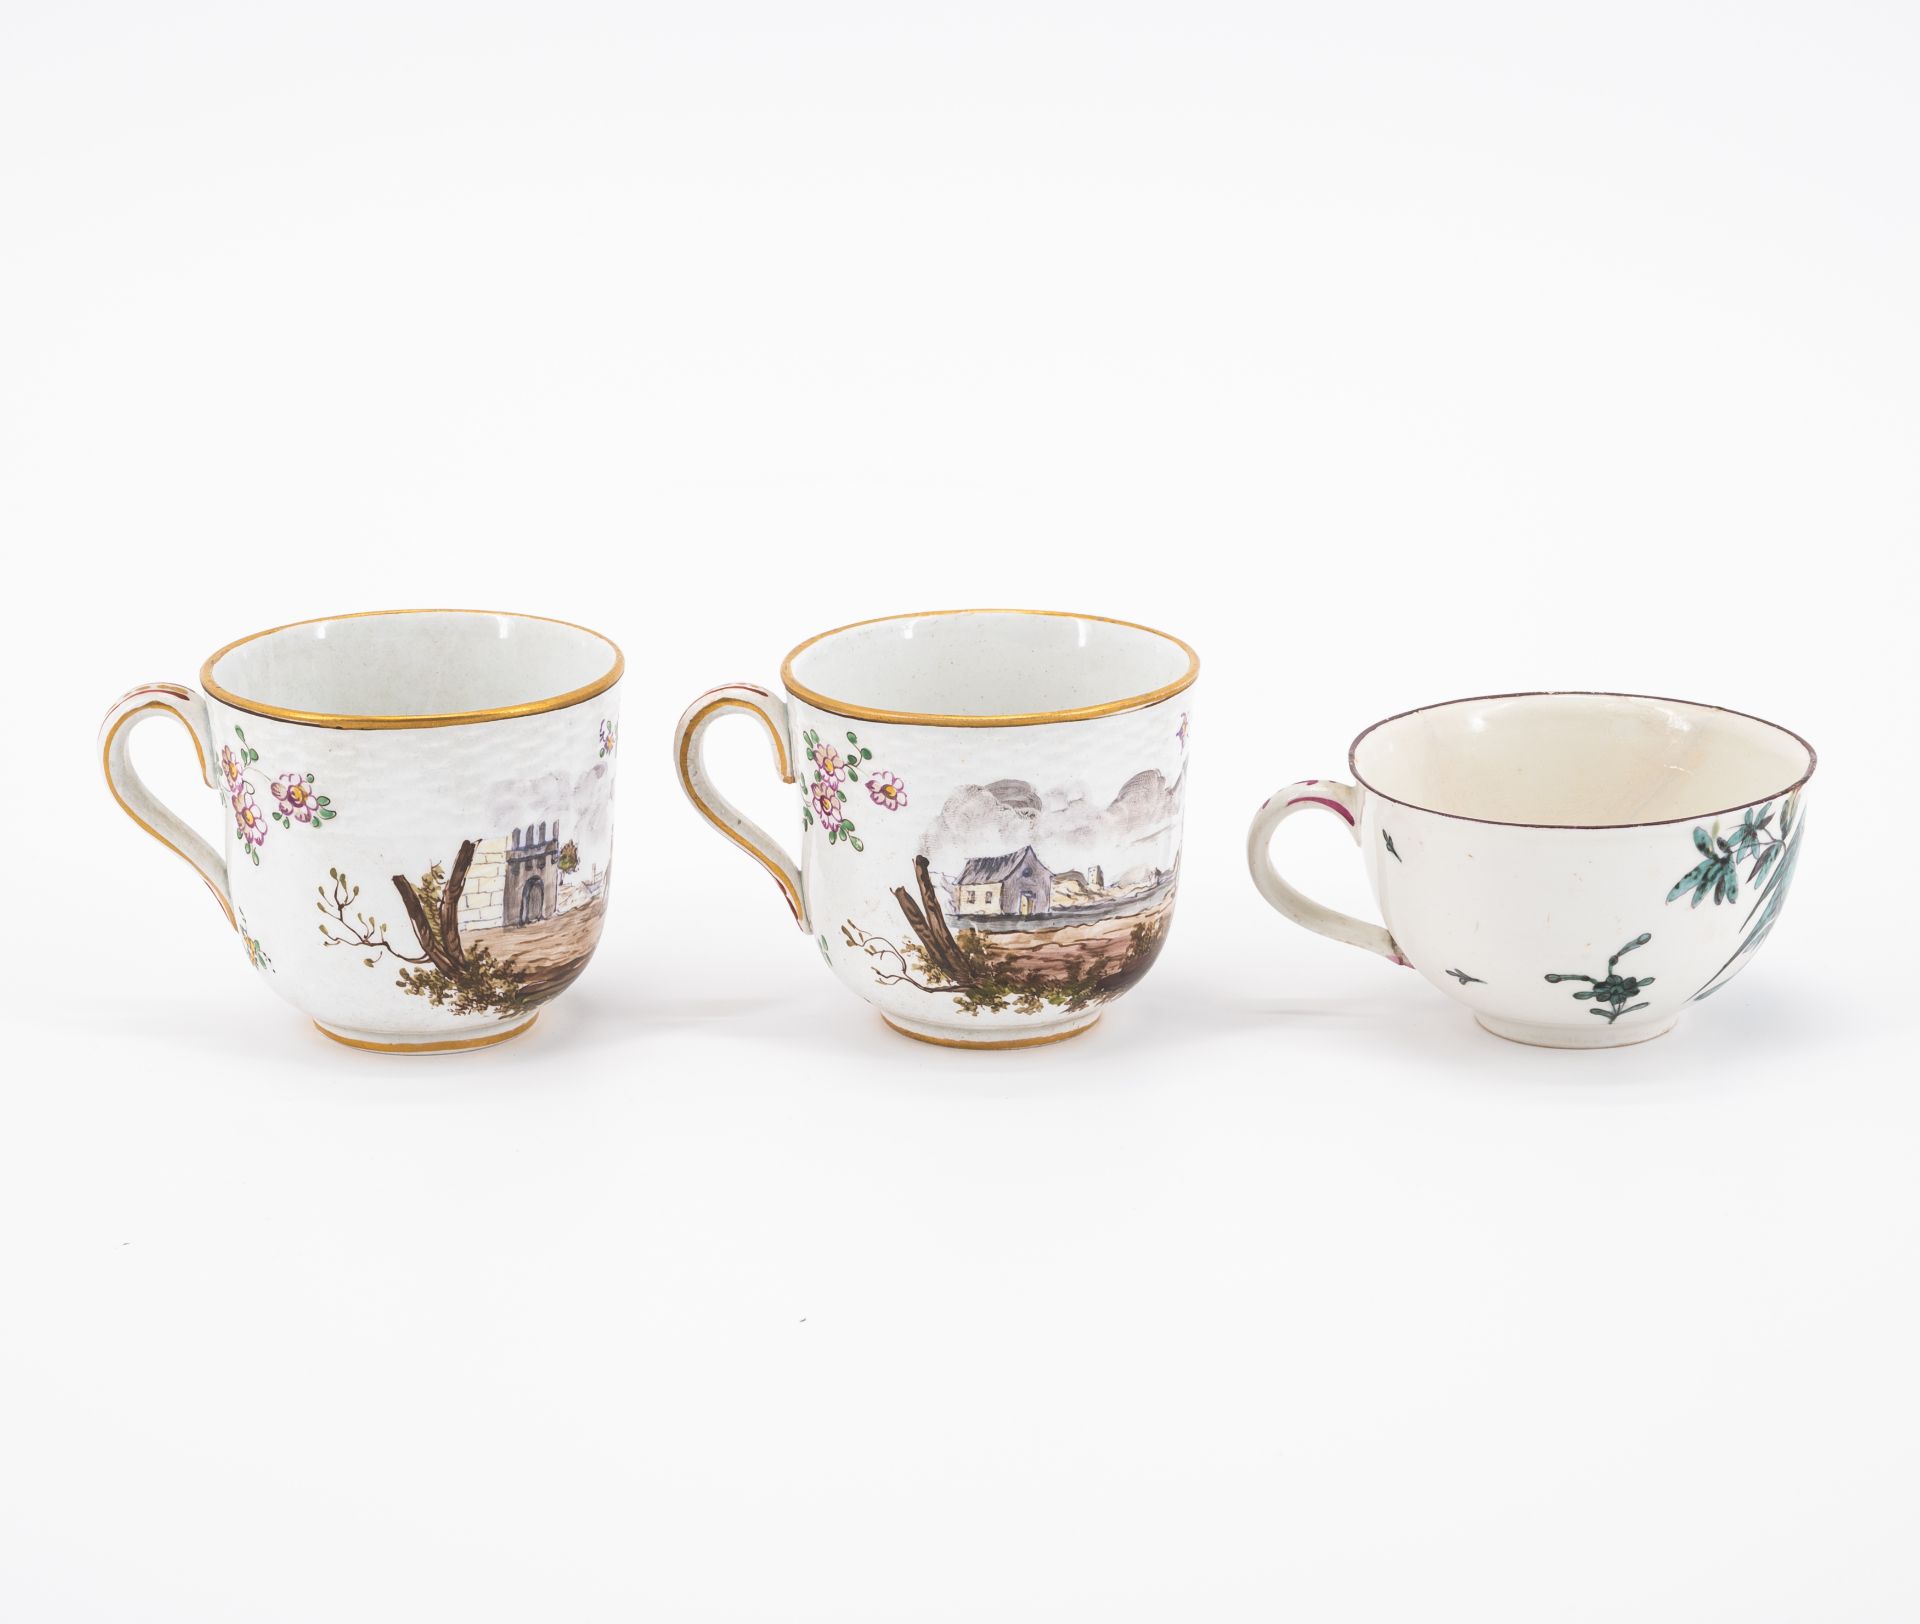 SIX PORCELAIN CUPS AND THREE SAUCERS WITH BIRD DECOR, FLOWERS AND LANDSCAPE SCENES - Image 4 of 16